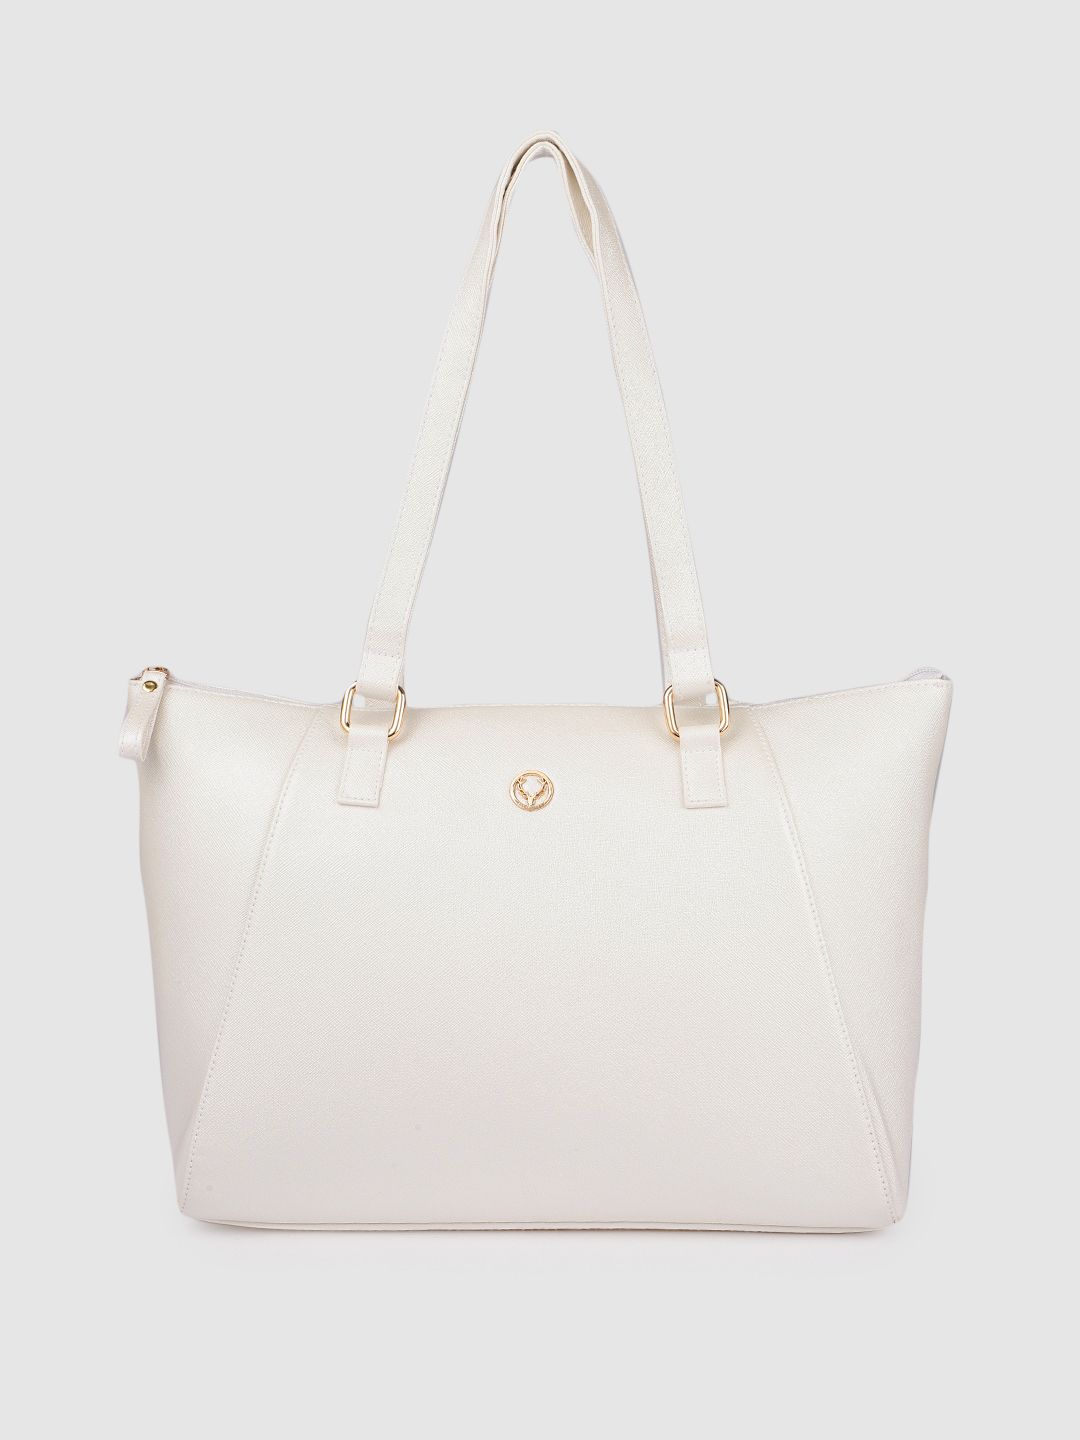 Allen Solly White PU Structured Shoulder Bag Price in India